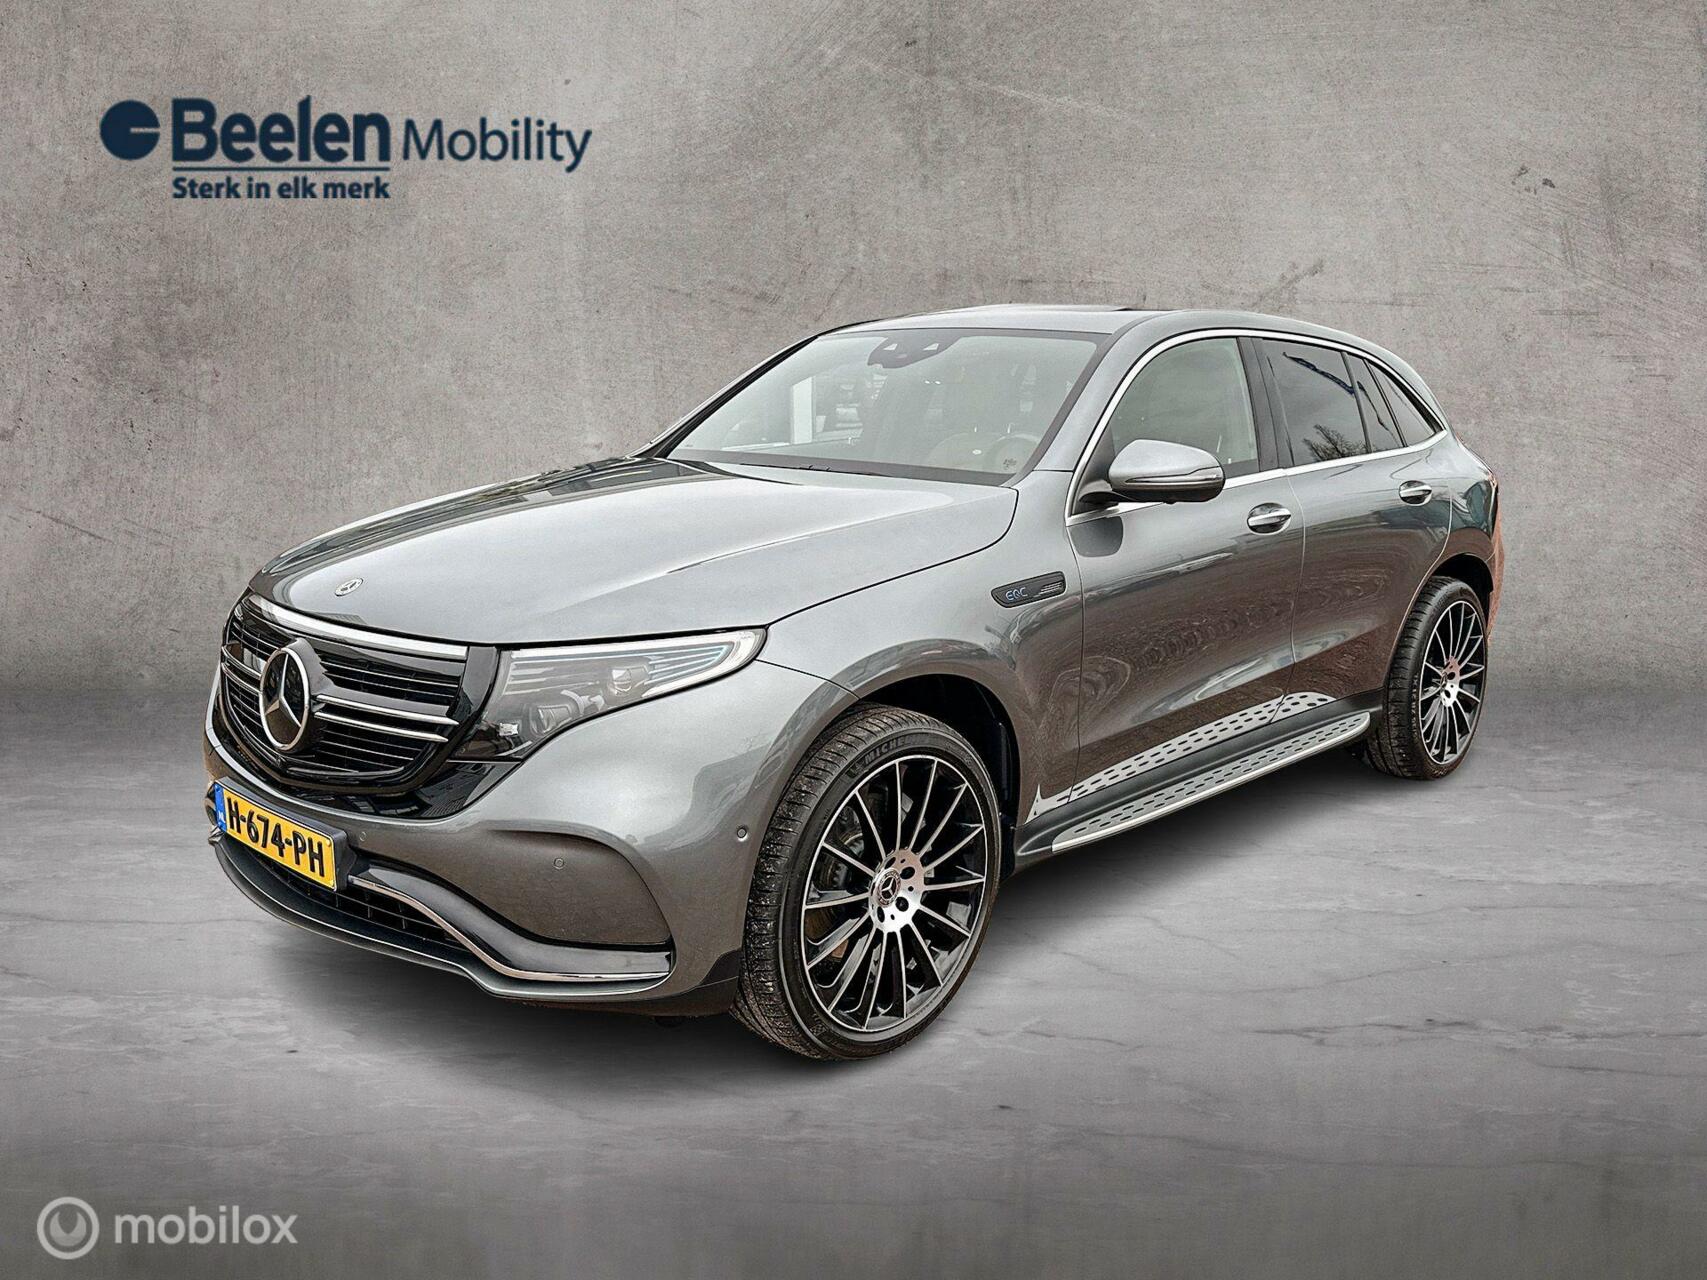 Mercedes EQC 400 4MATIC Business Solution Luxury 80 kWh, bij viaBOVAG.nl